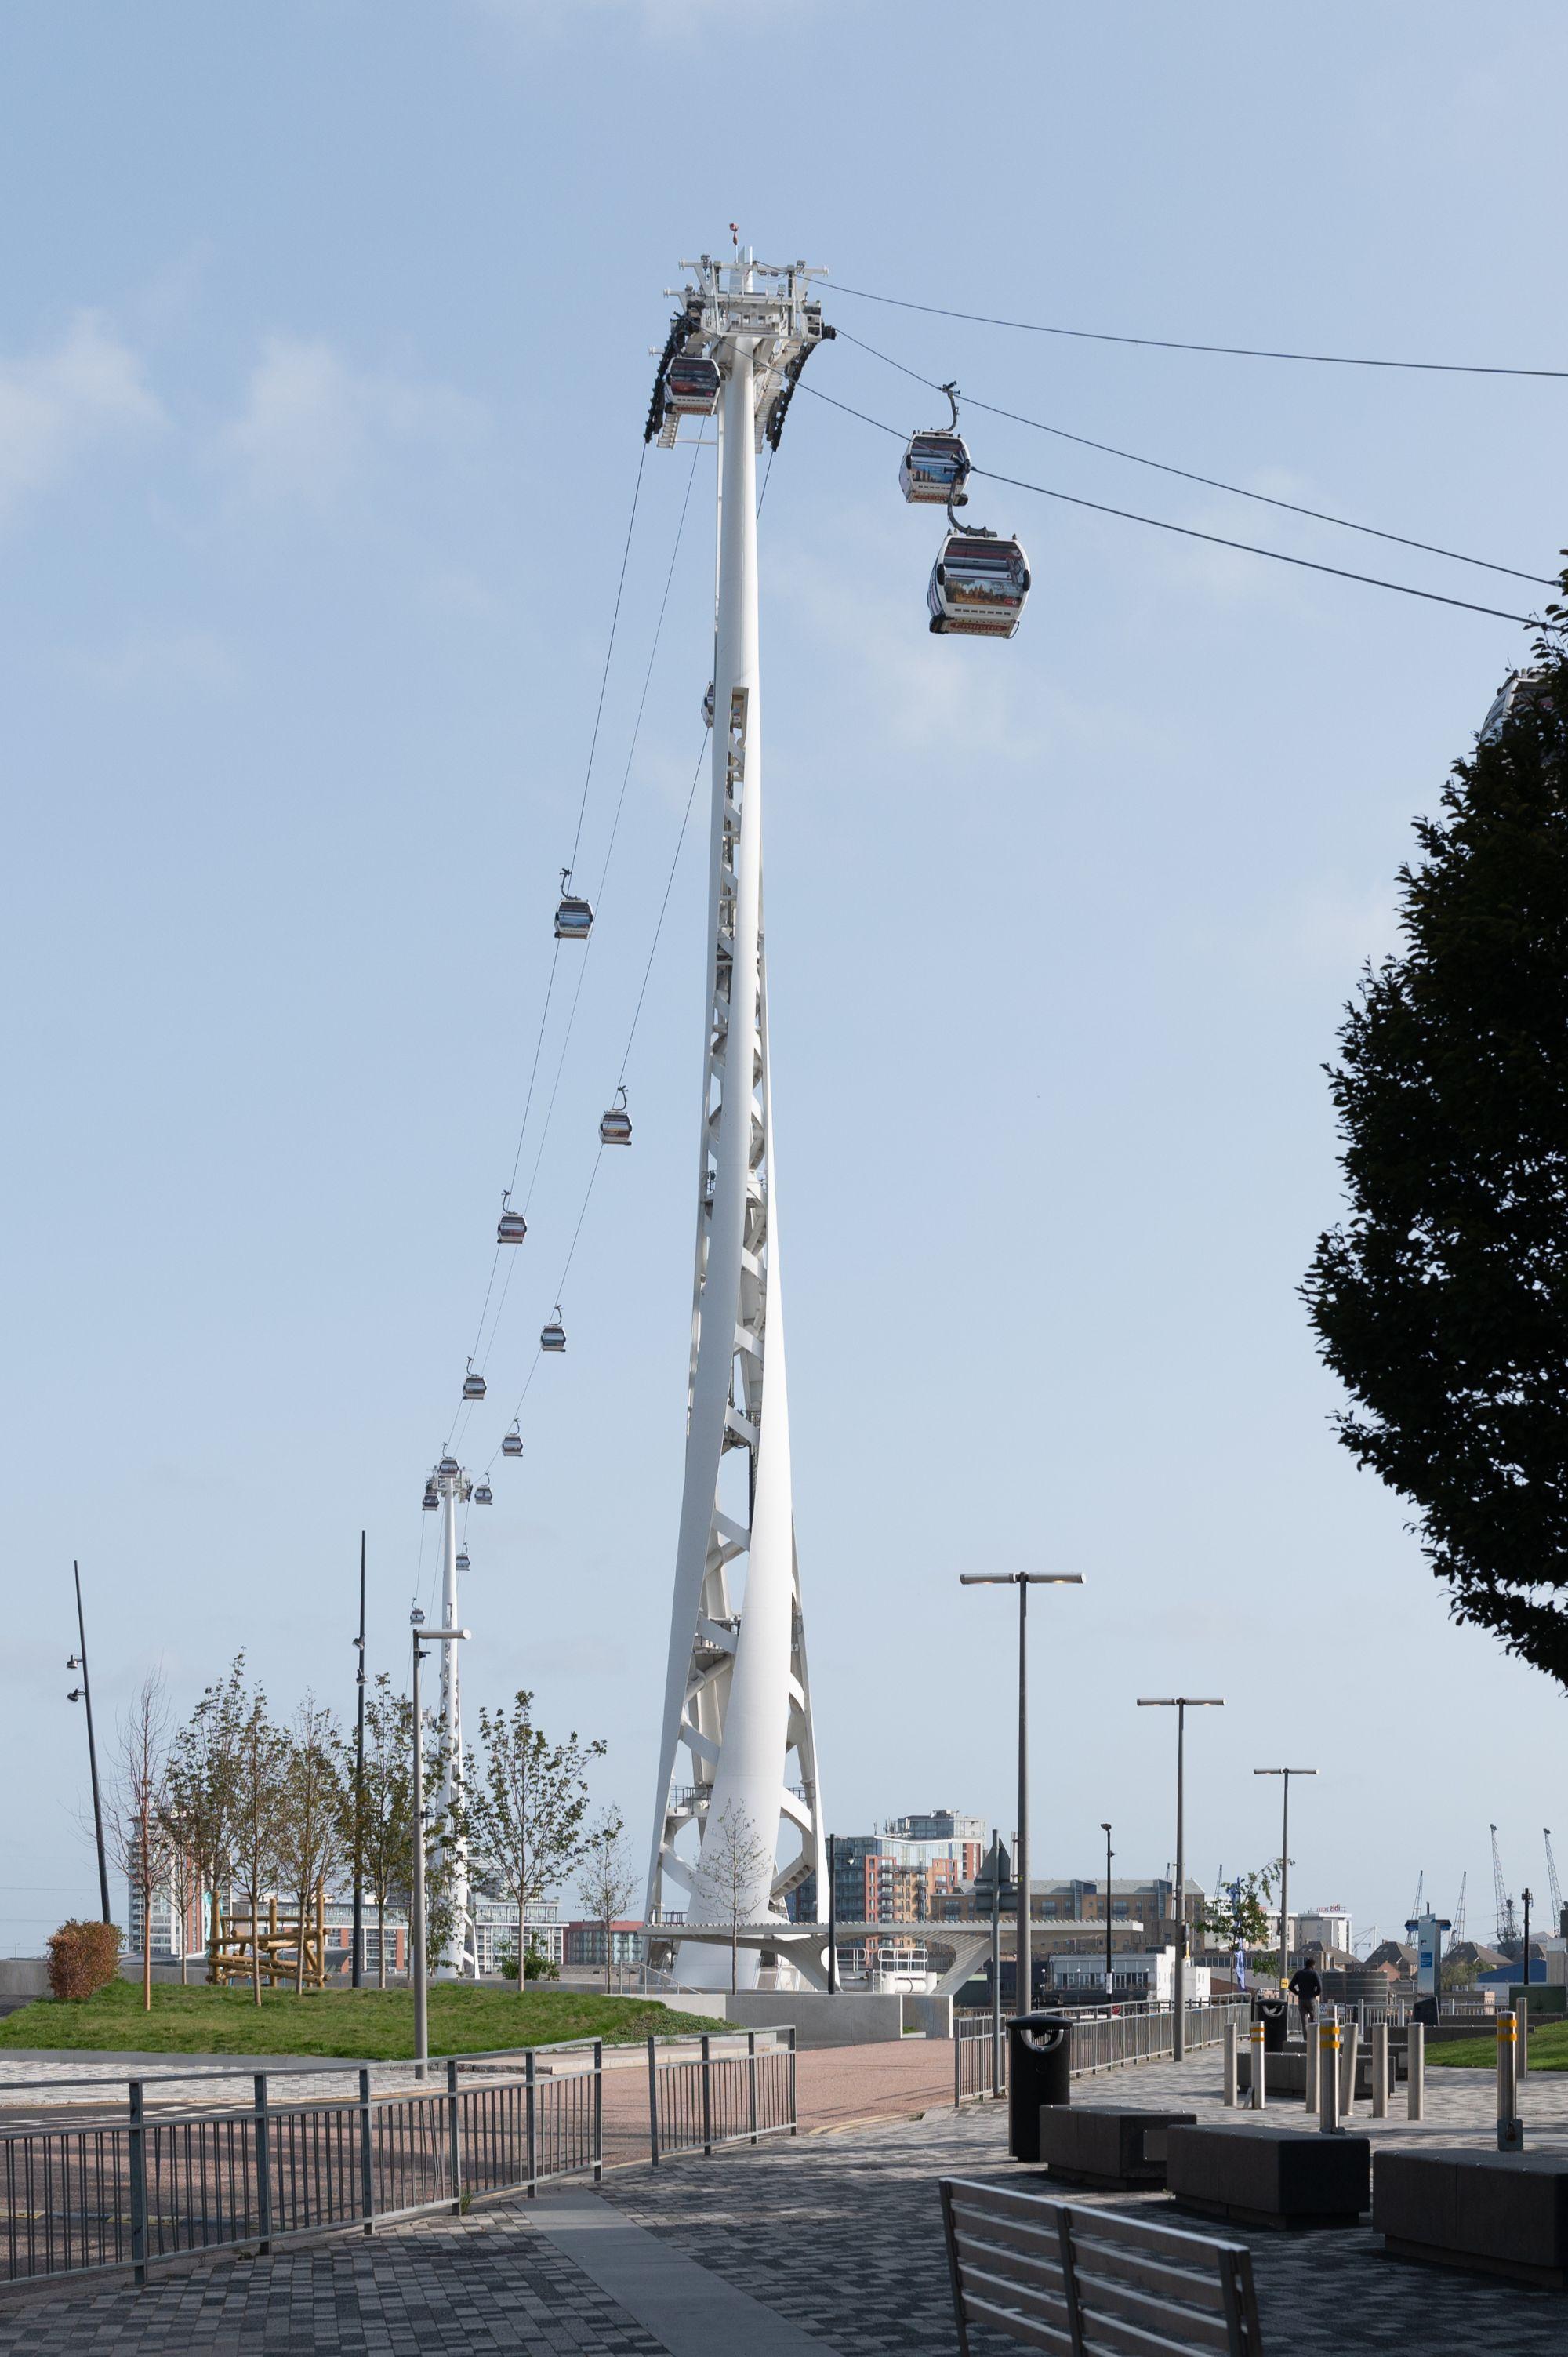 The cable car tower reaching towards the sky